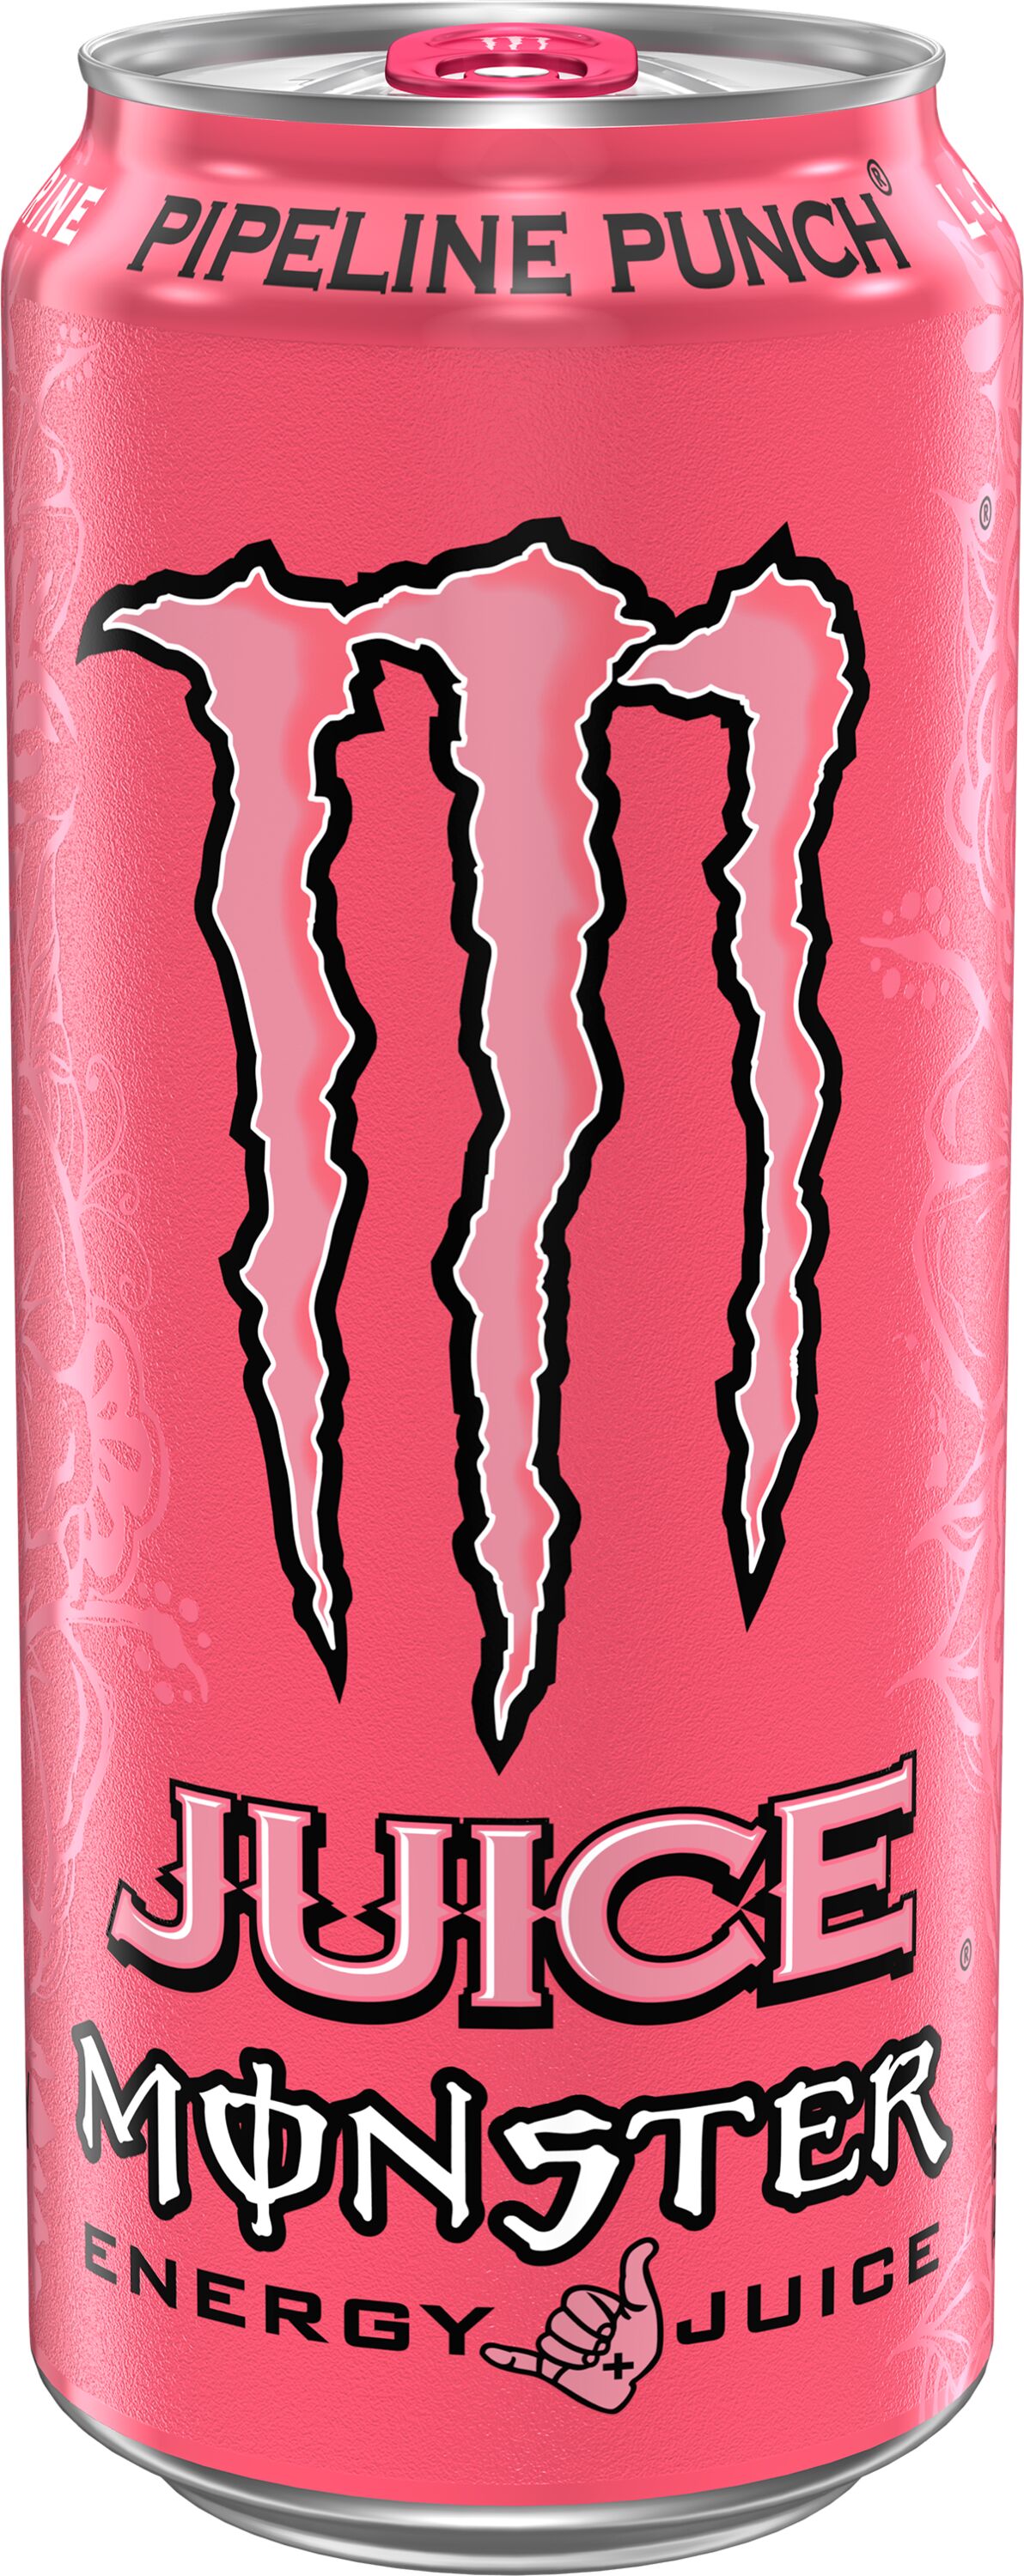 MONSTER ENERGY oz Pipeline Punch Drink in the Soft Drinks at Lowes.com